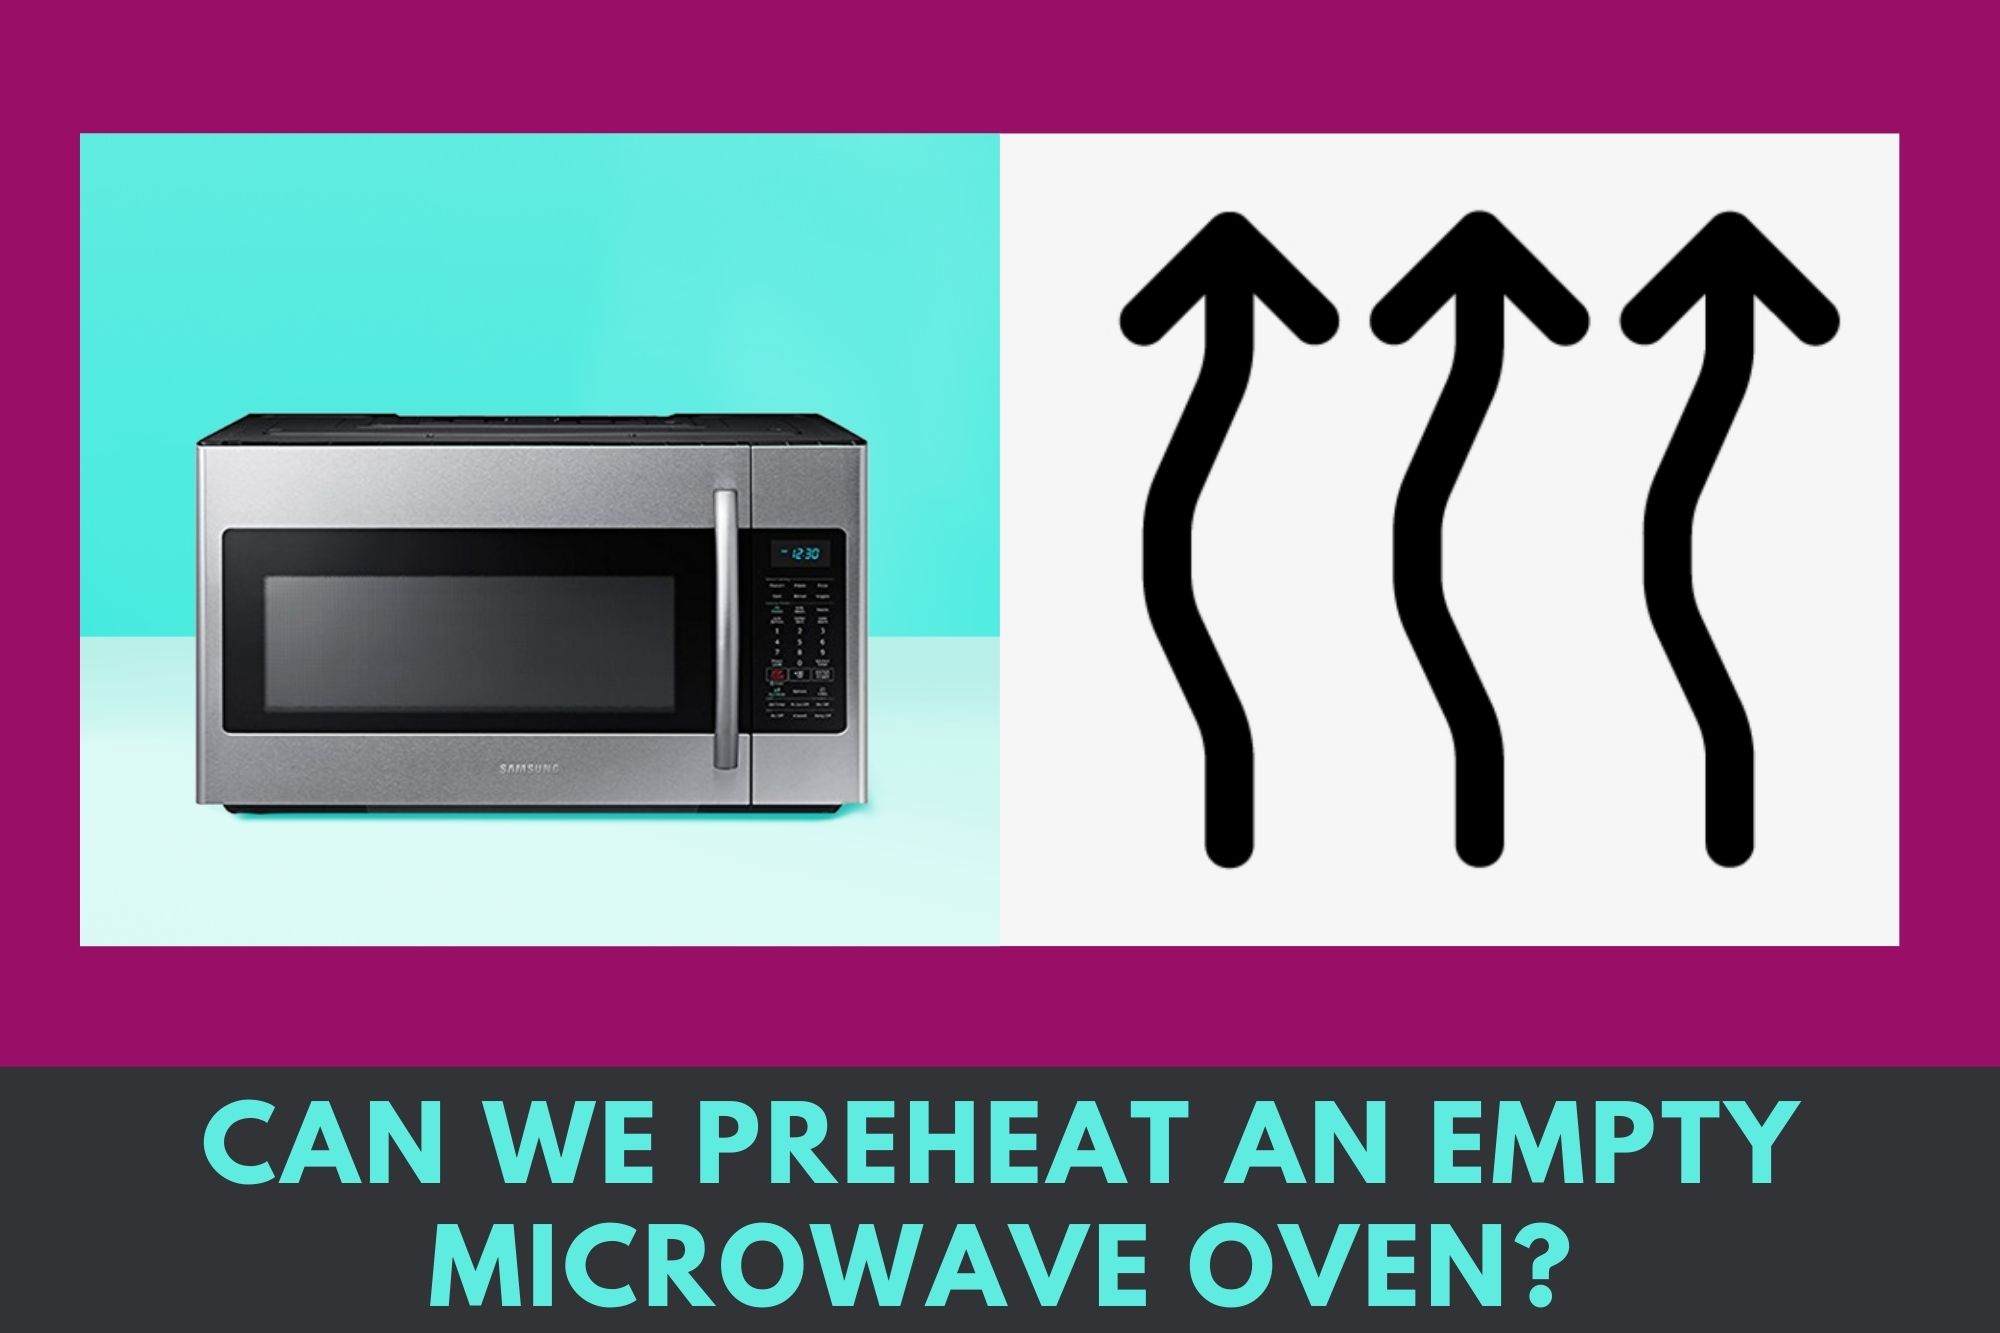 Can We Preheat Microwave Oven Empty? Do You Know What Is Preheating? What Generally Preheating Means? Why Do We Preheat Ovens? What’s The Difference Between A Traditional Oven And A Microwave? Will Preheating Damage Your Microwave? How To Check If Your Microwave Is Still Working Or Not After A Preheating Accident? What Safety Measures Can You Take To Keep Your Microwave Oven Safe?